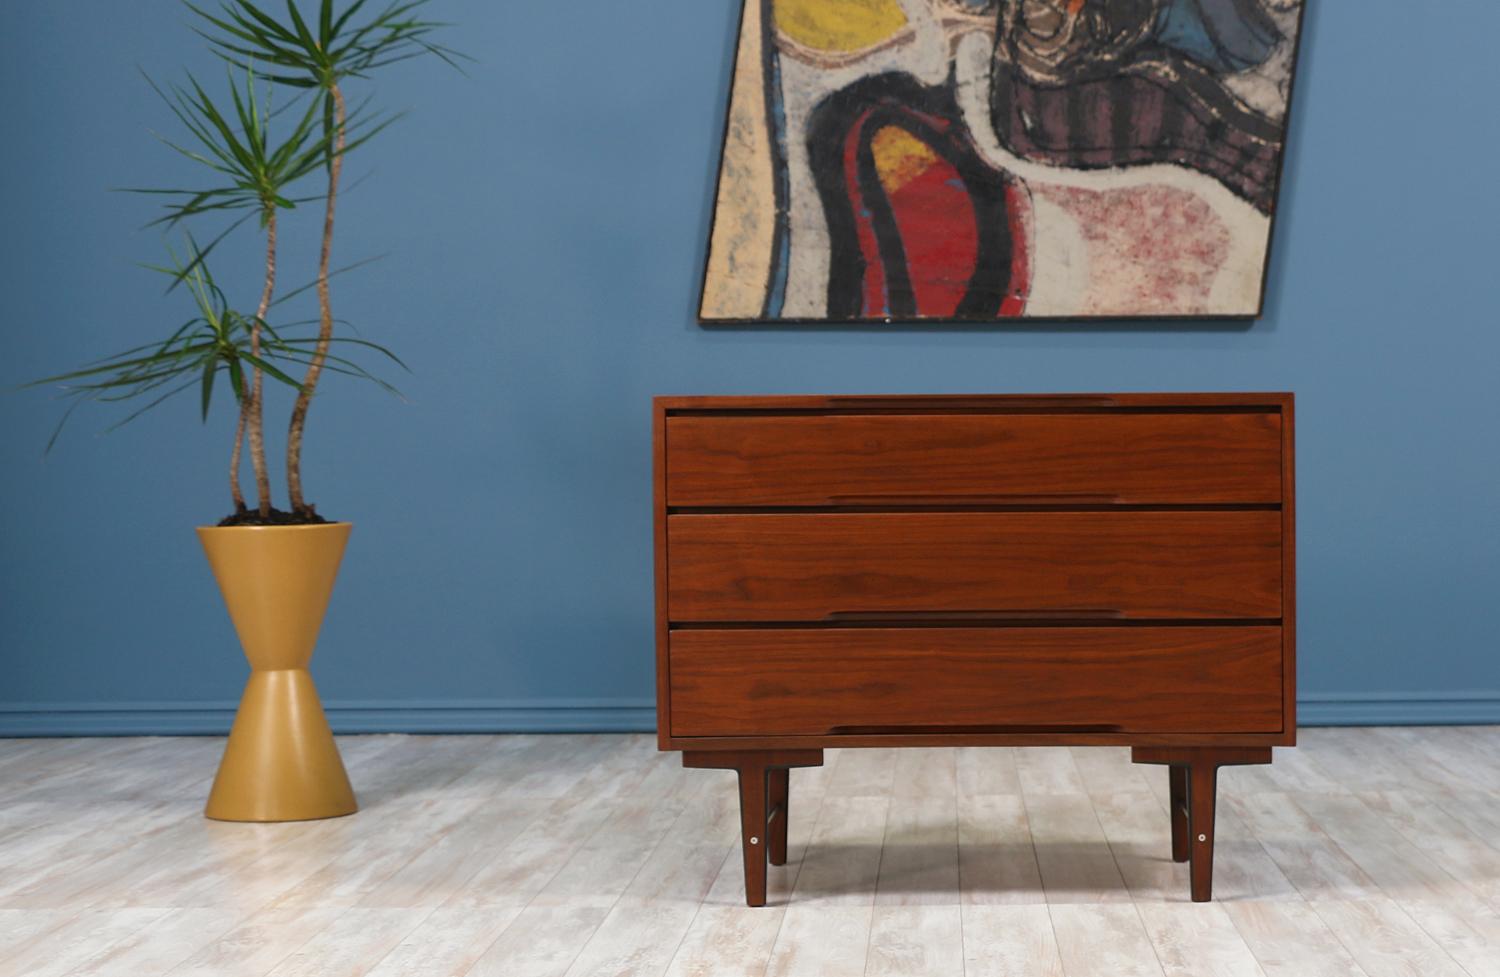 Mid-Century Modern chest designed and manufactured in the United States by Glenn of California in the 1950s. Furniture company based in Arcadia, California, and part of the modernist design movement in the West Coast, Glenn of California embarked